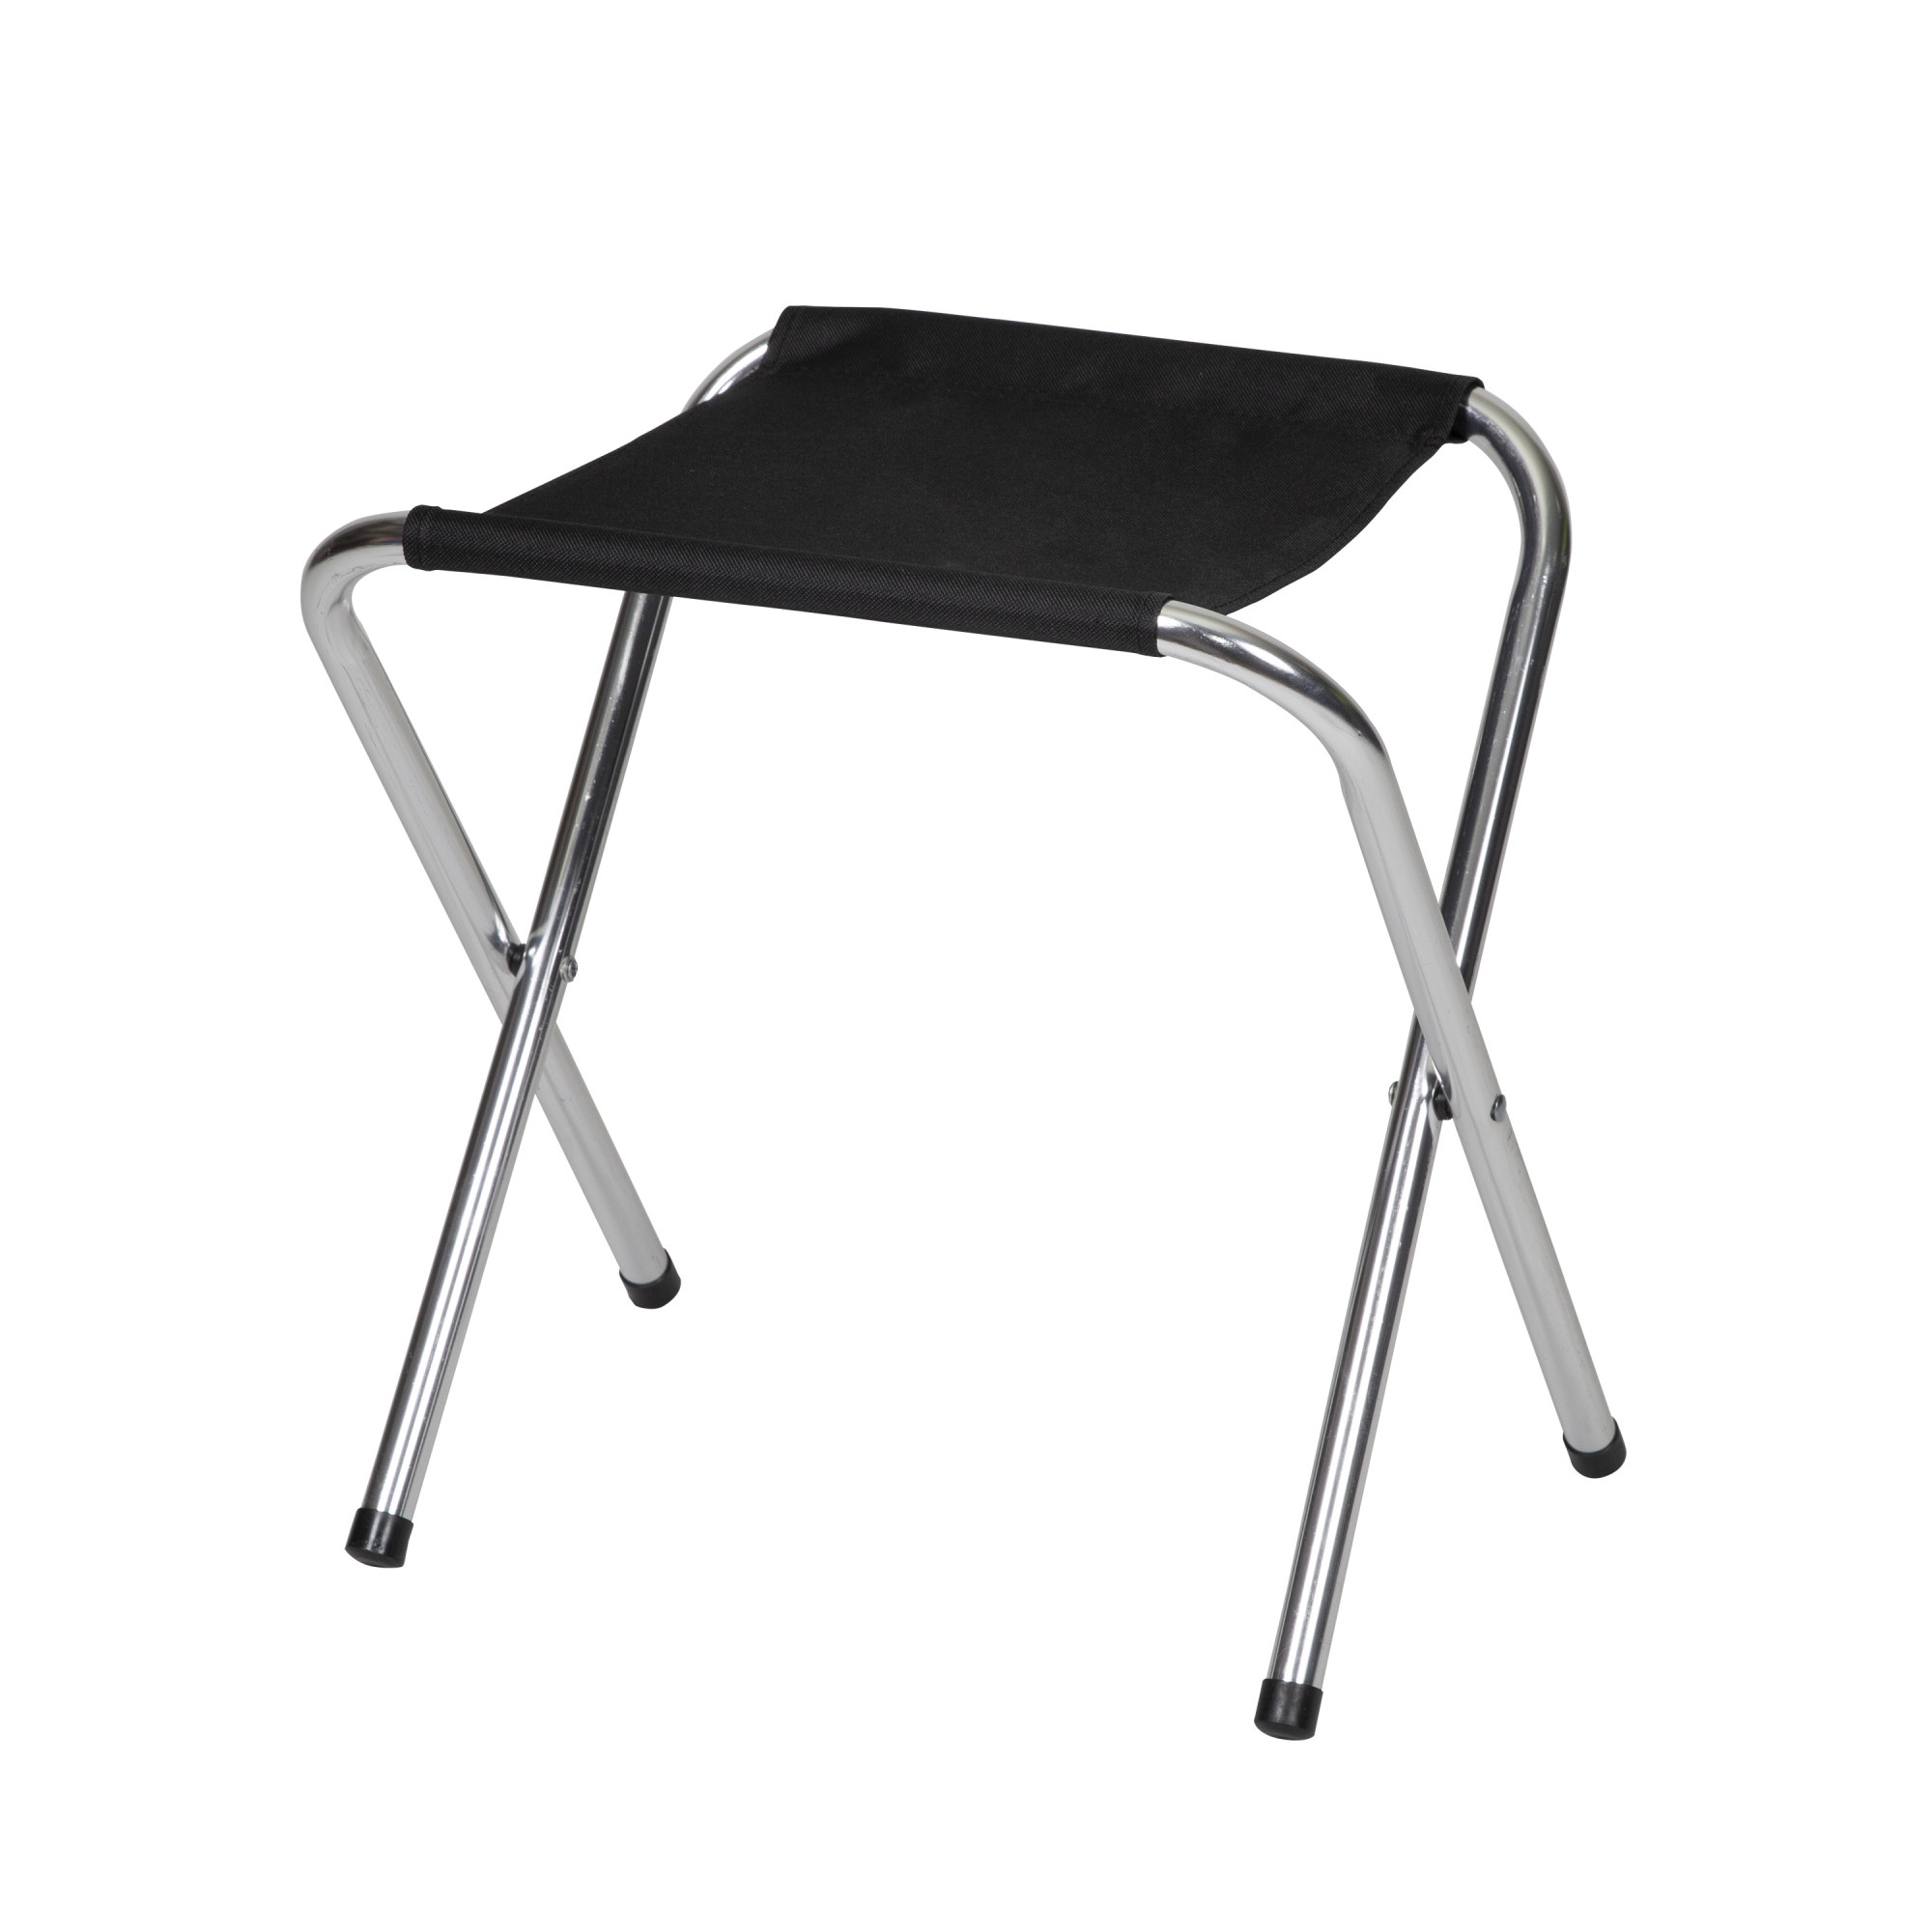 Stansport Camping Table Black Polyester 15.7" L x 12.8" W x 15" H - image 2 of 11